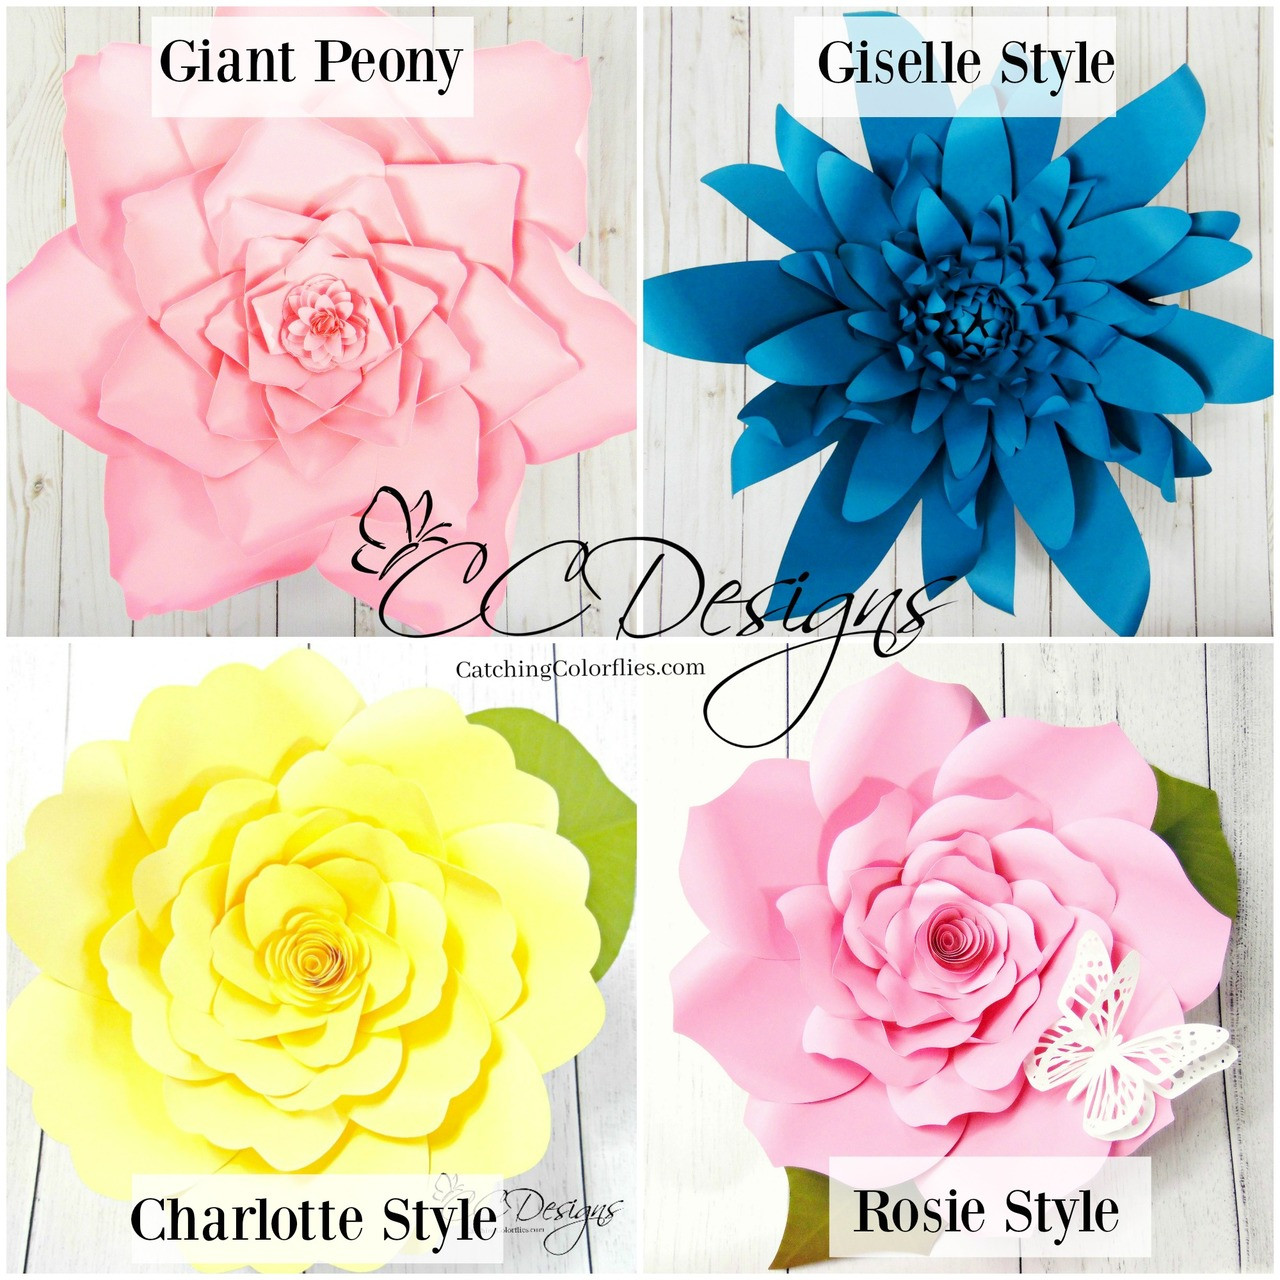 Paper Rose Template and Tutorial – Ta Muchly Paper Blooms